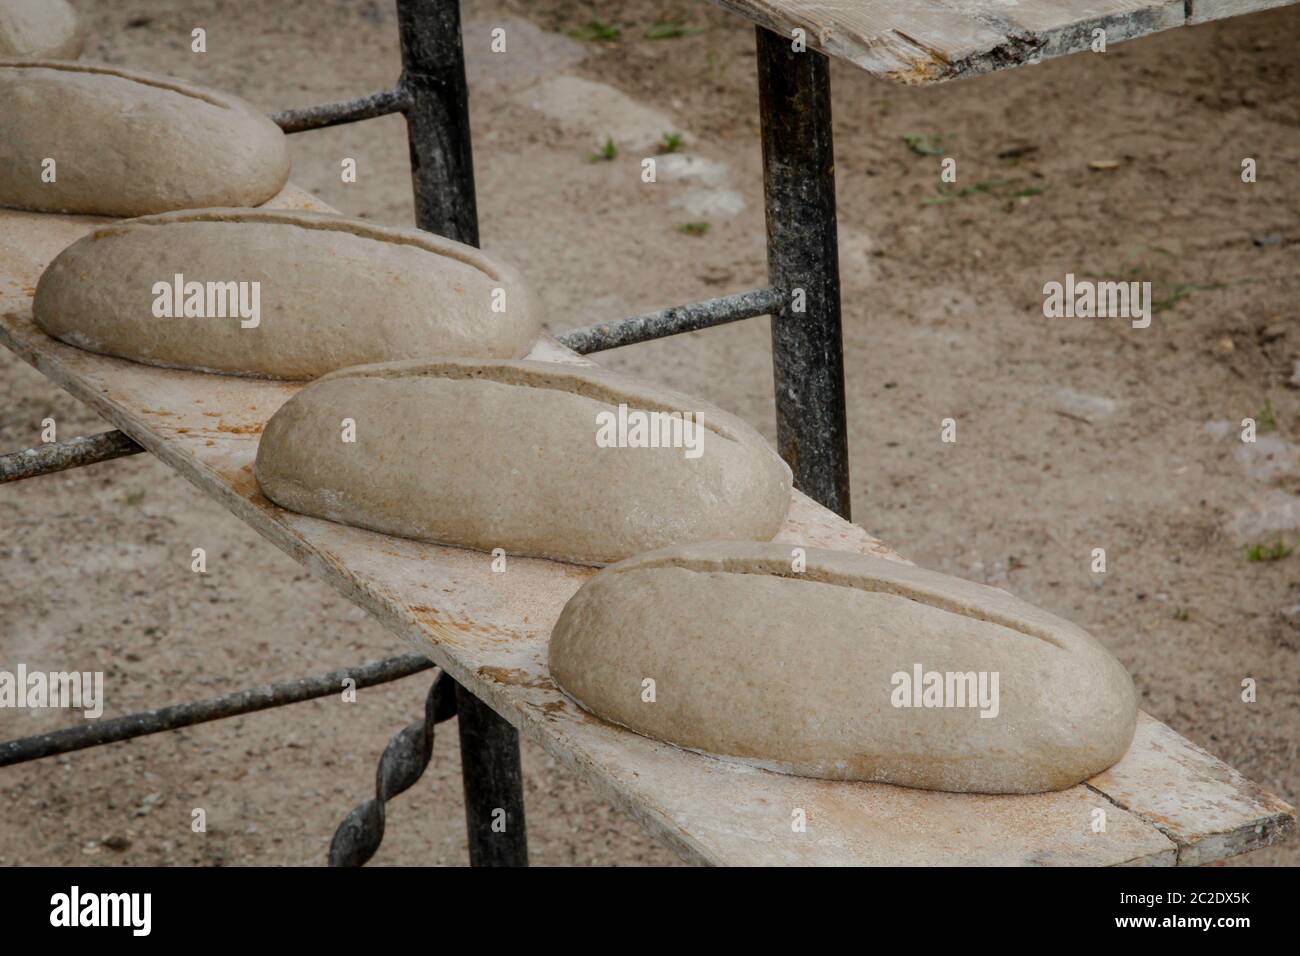 bread loaves lie on a board in front of a bakery Stock Photo